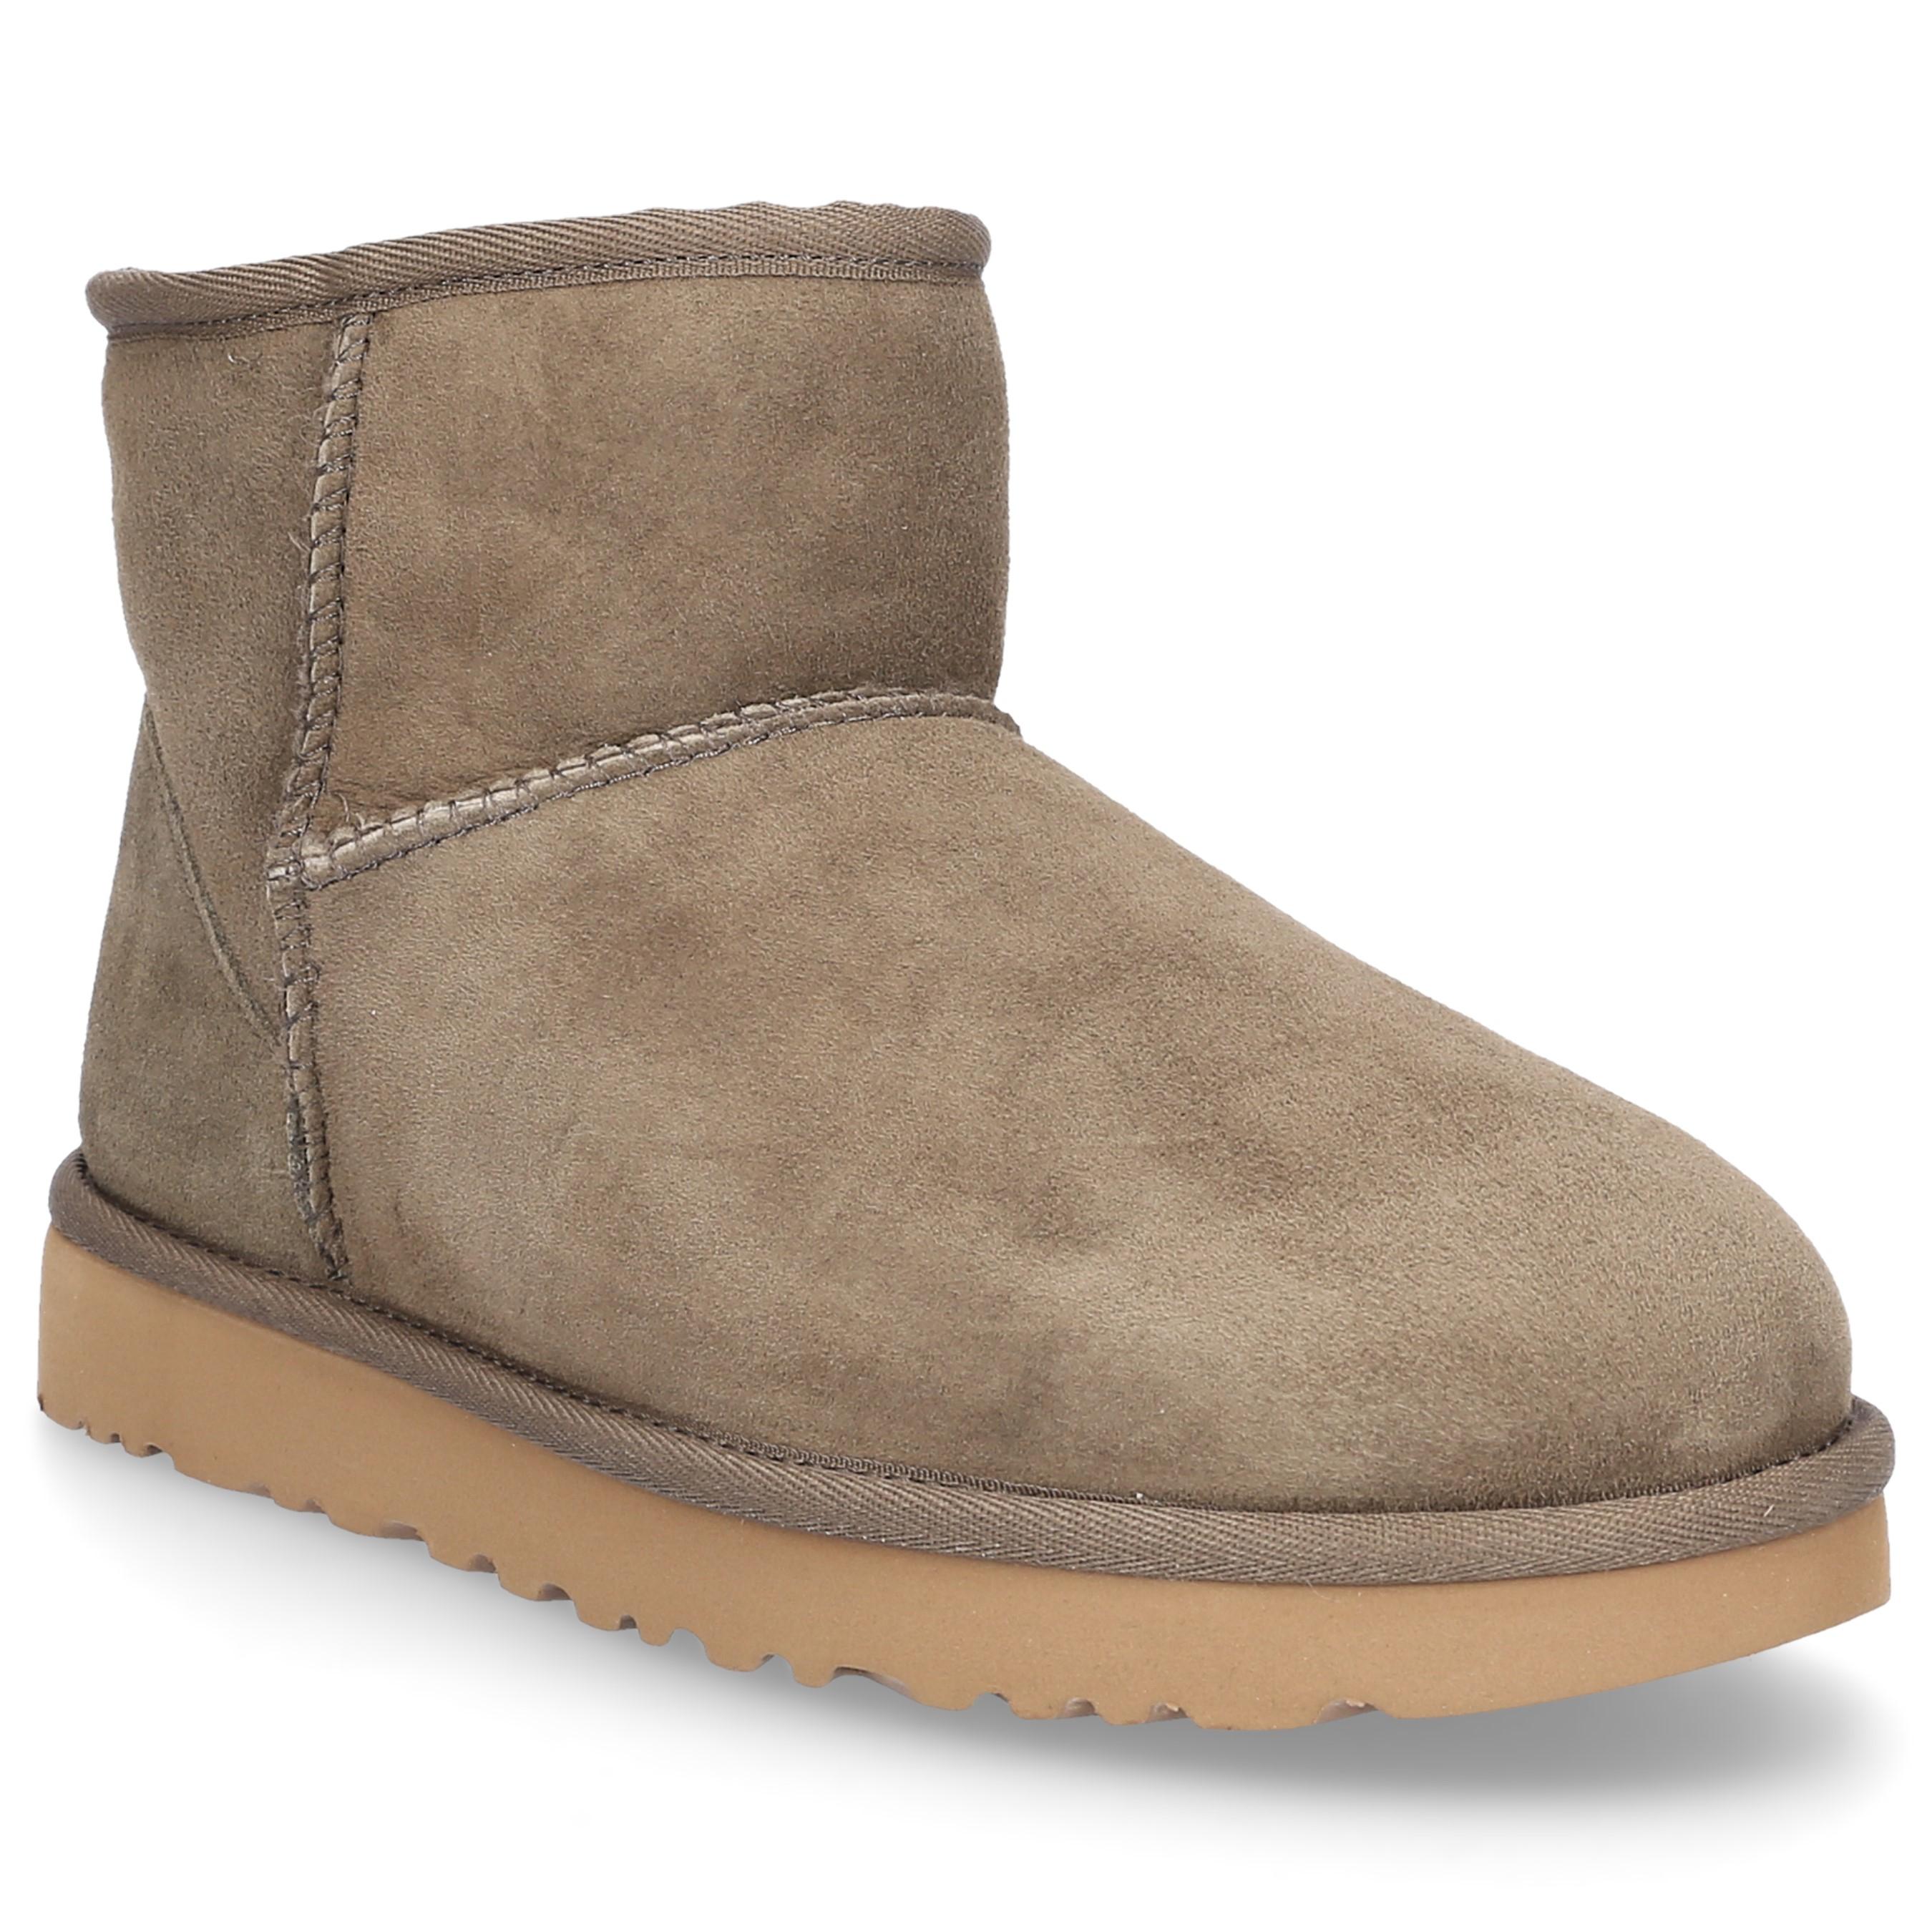 UGG Suede Classic Mini Ii Sheepskin Ankle Boots in Olive (Green) - Lyst